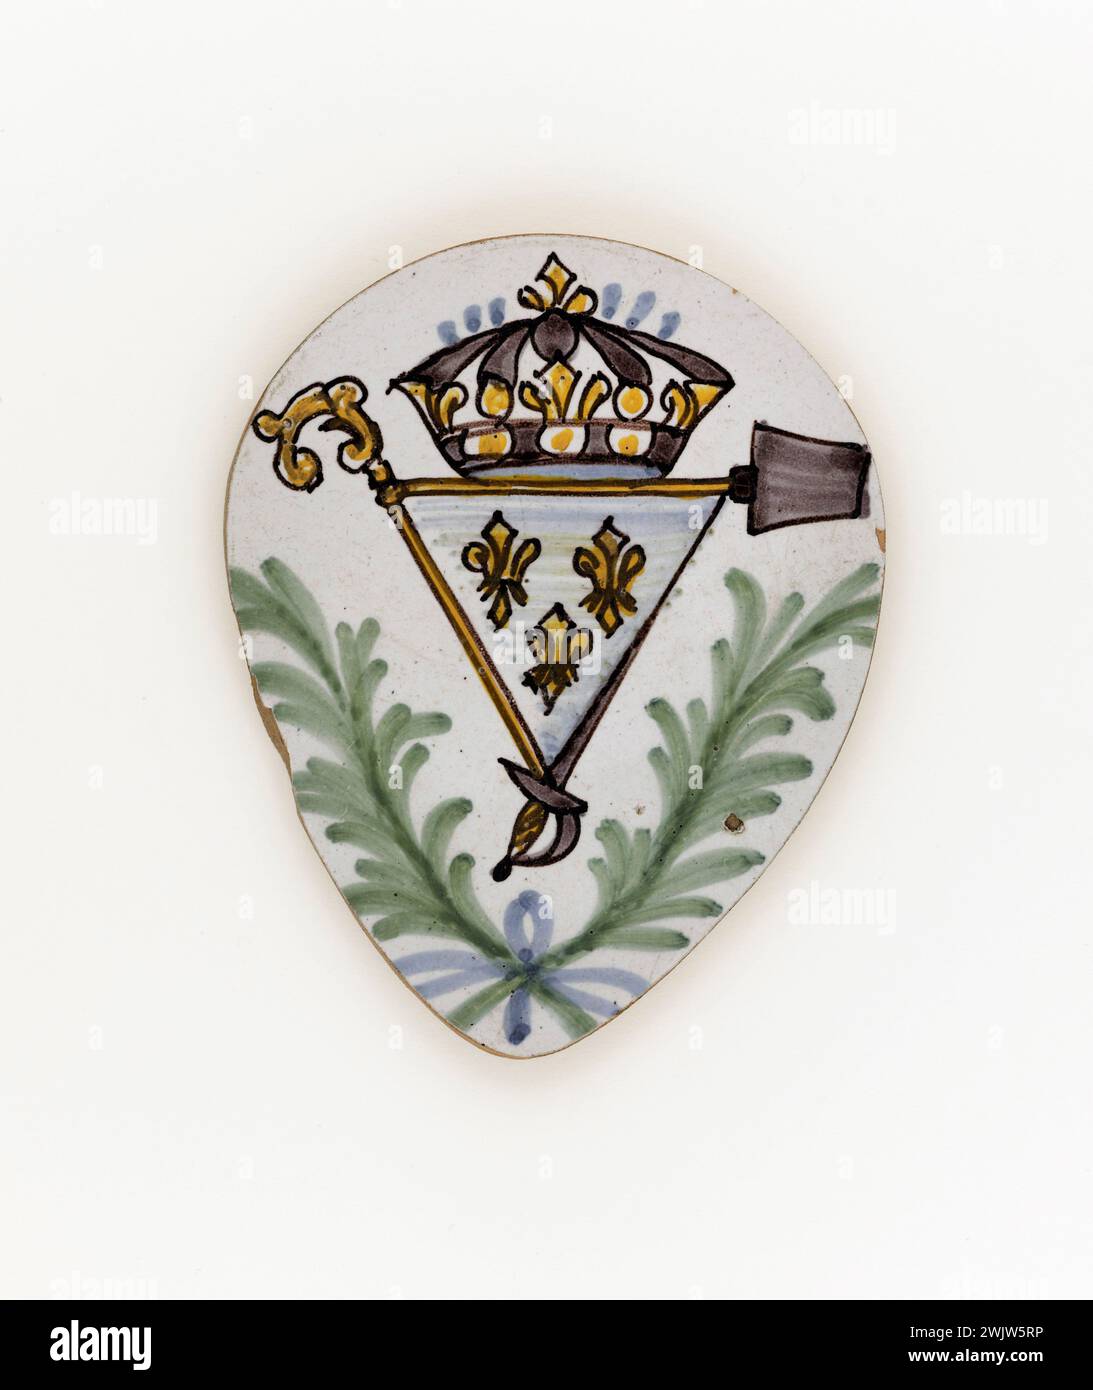 Anonymous. Fragment. Earthenware. Paris, Carnavalet museum. 71684-23 Coronne, decoration, faience, fragment, lilies, revolutionary period, French revolution, king, royalte, plate Stock Photo